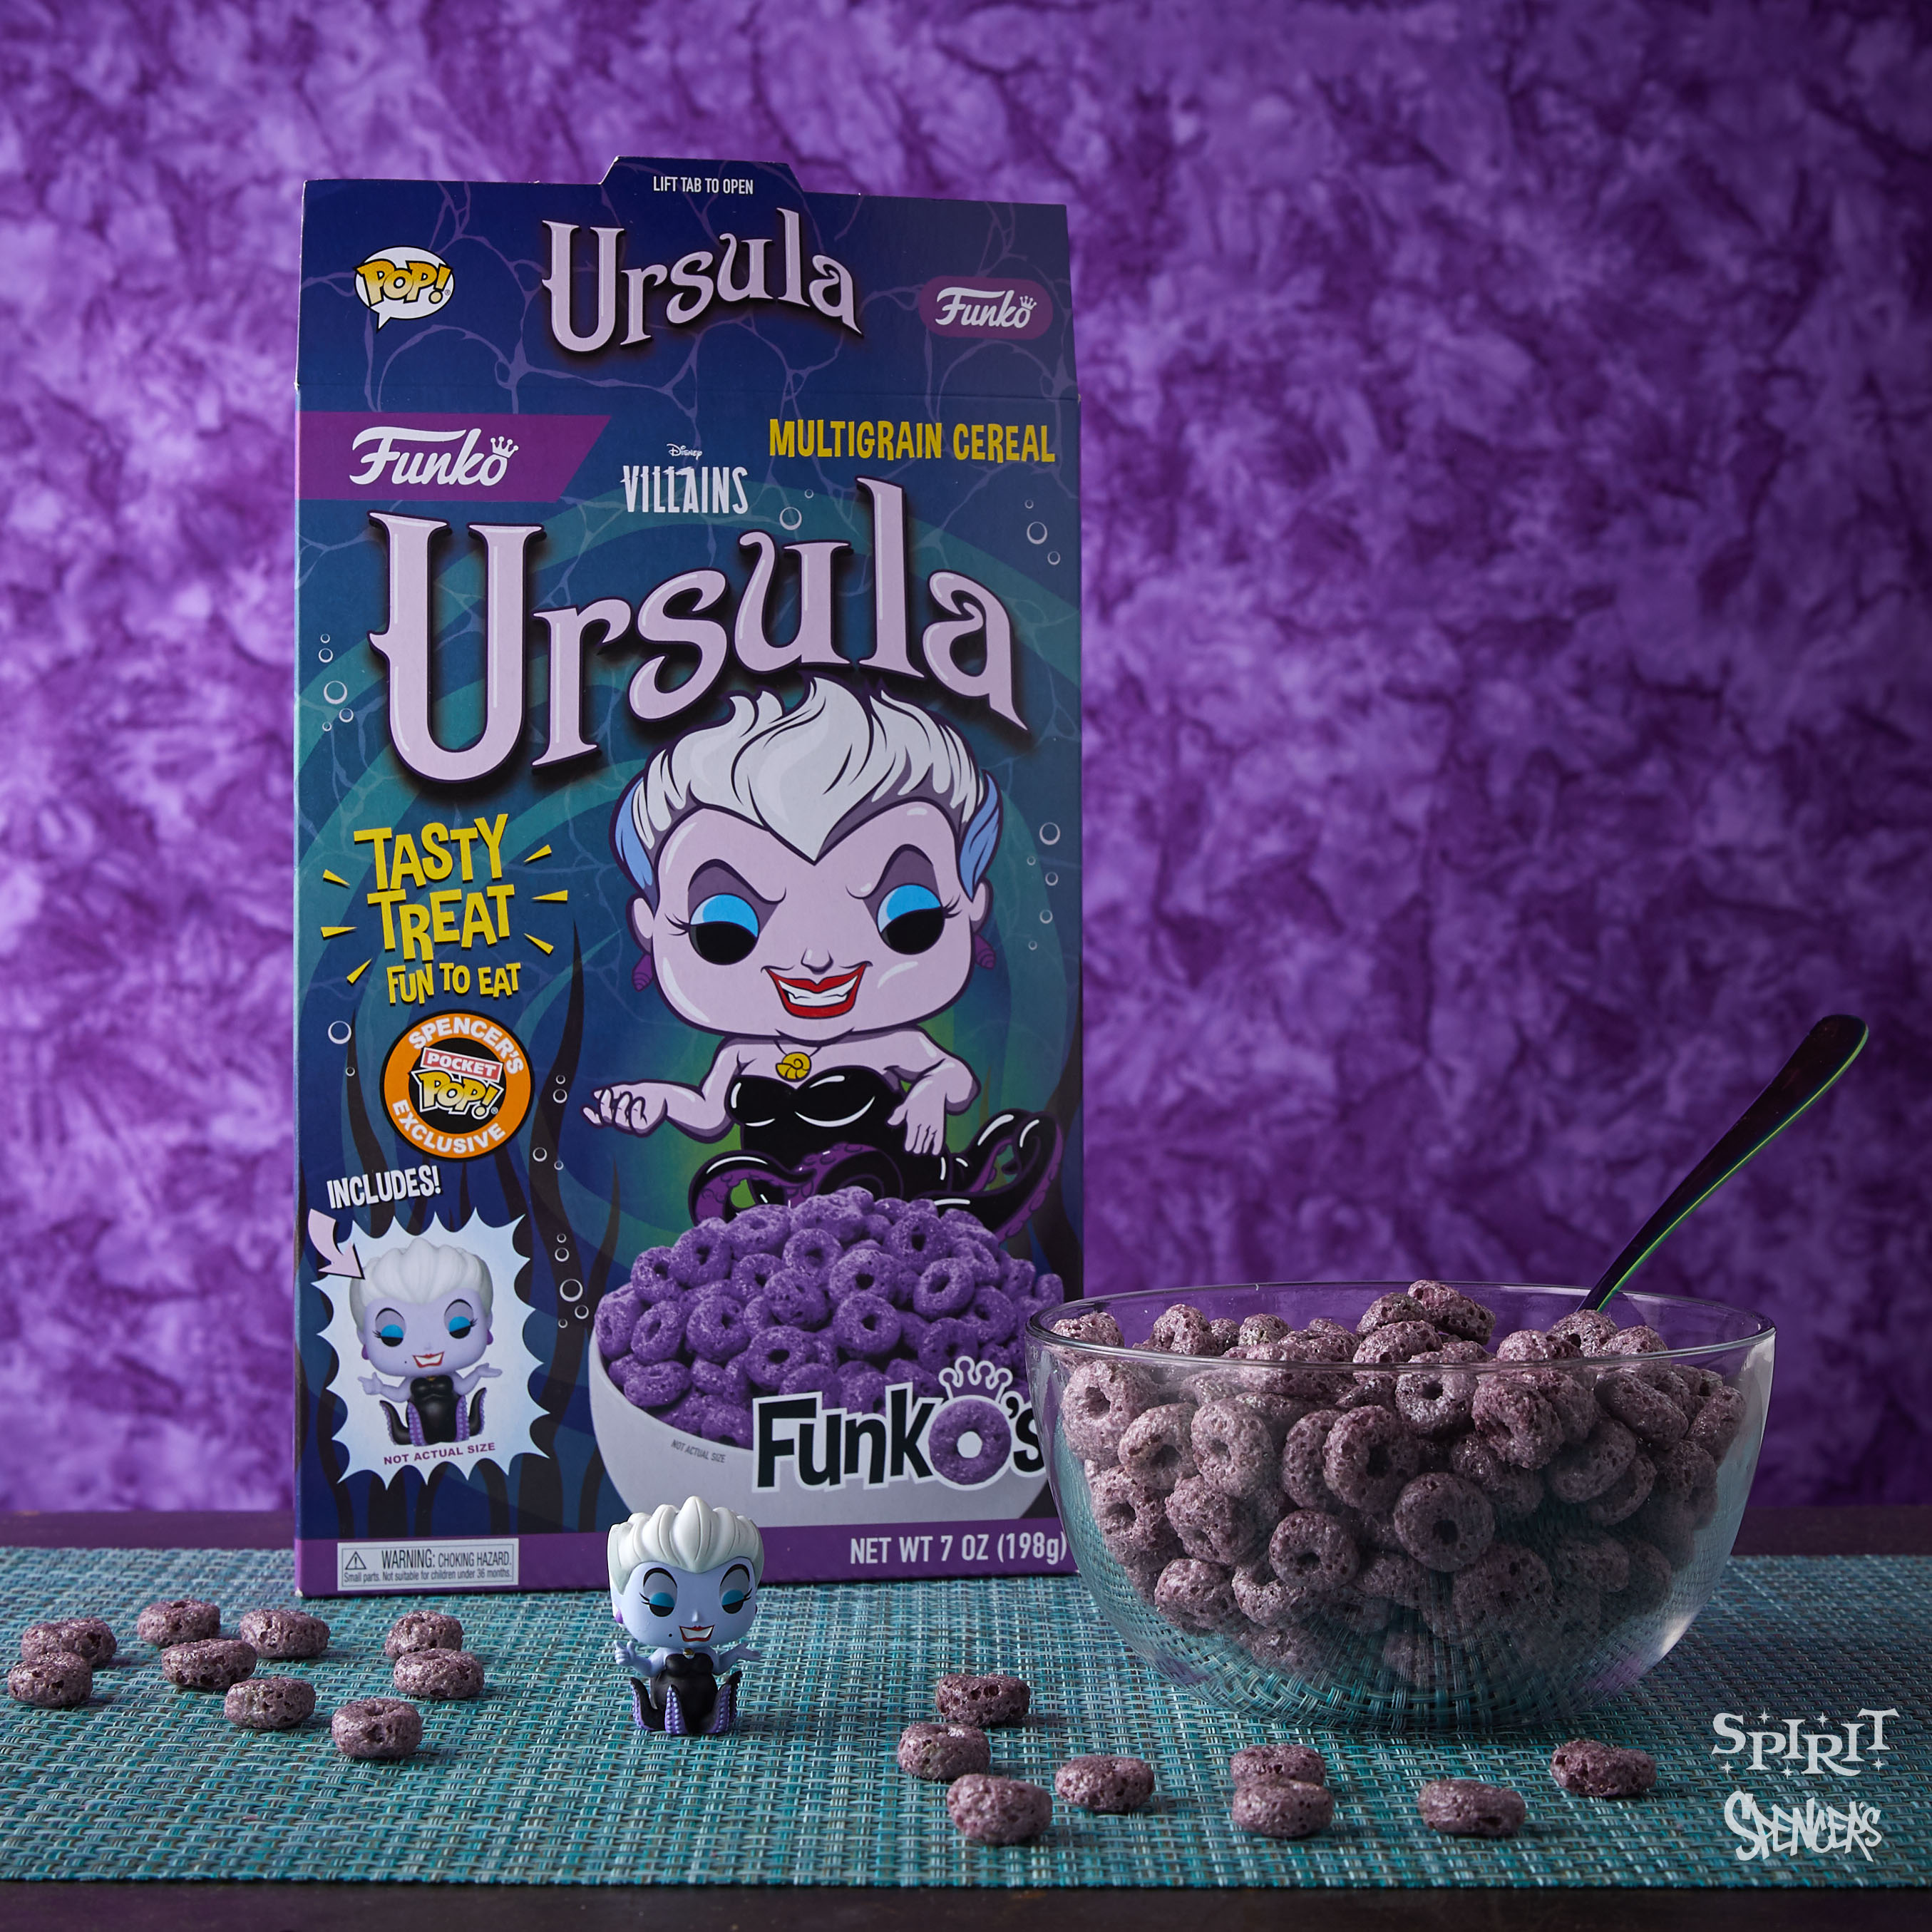 Disney Villains FunkOs Cereal Just In Time For Halloween